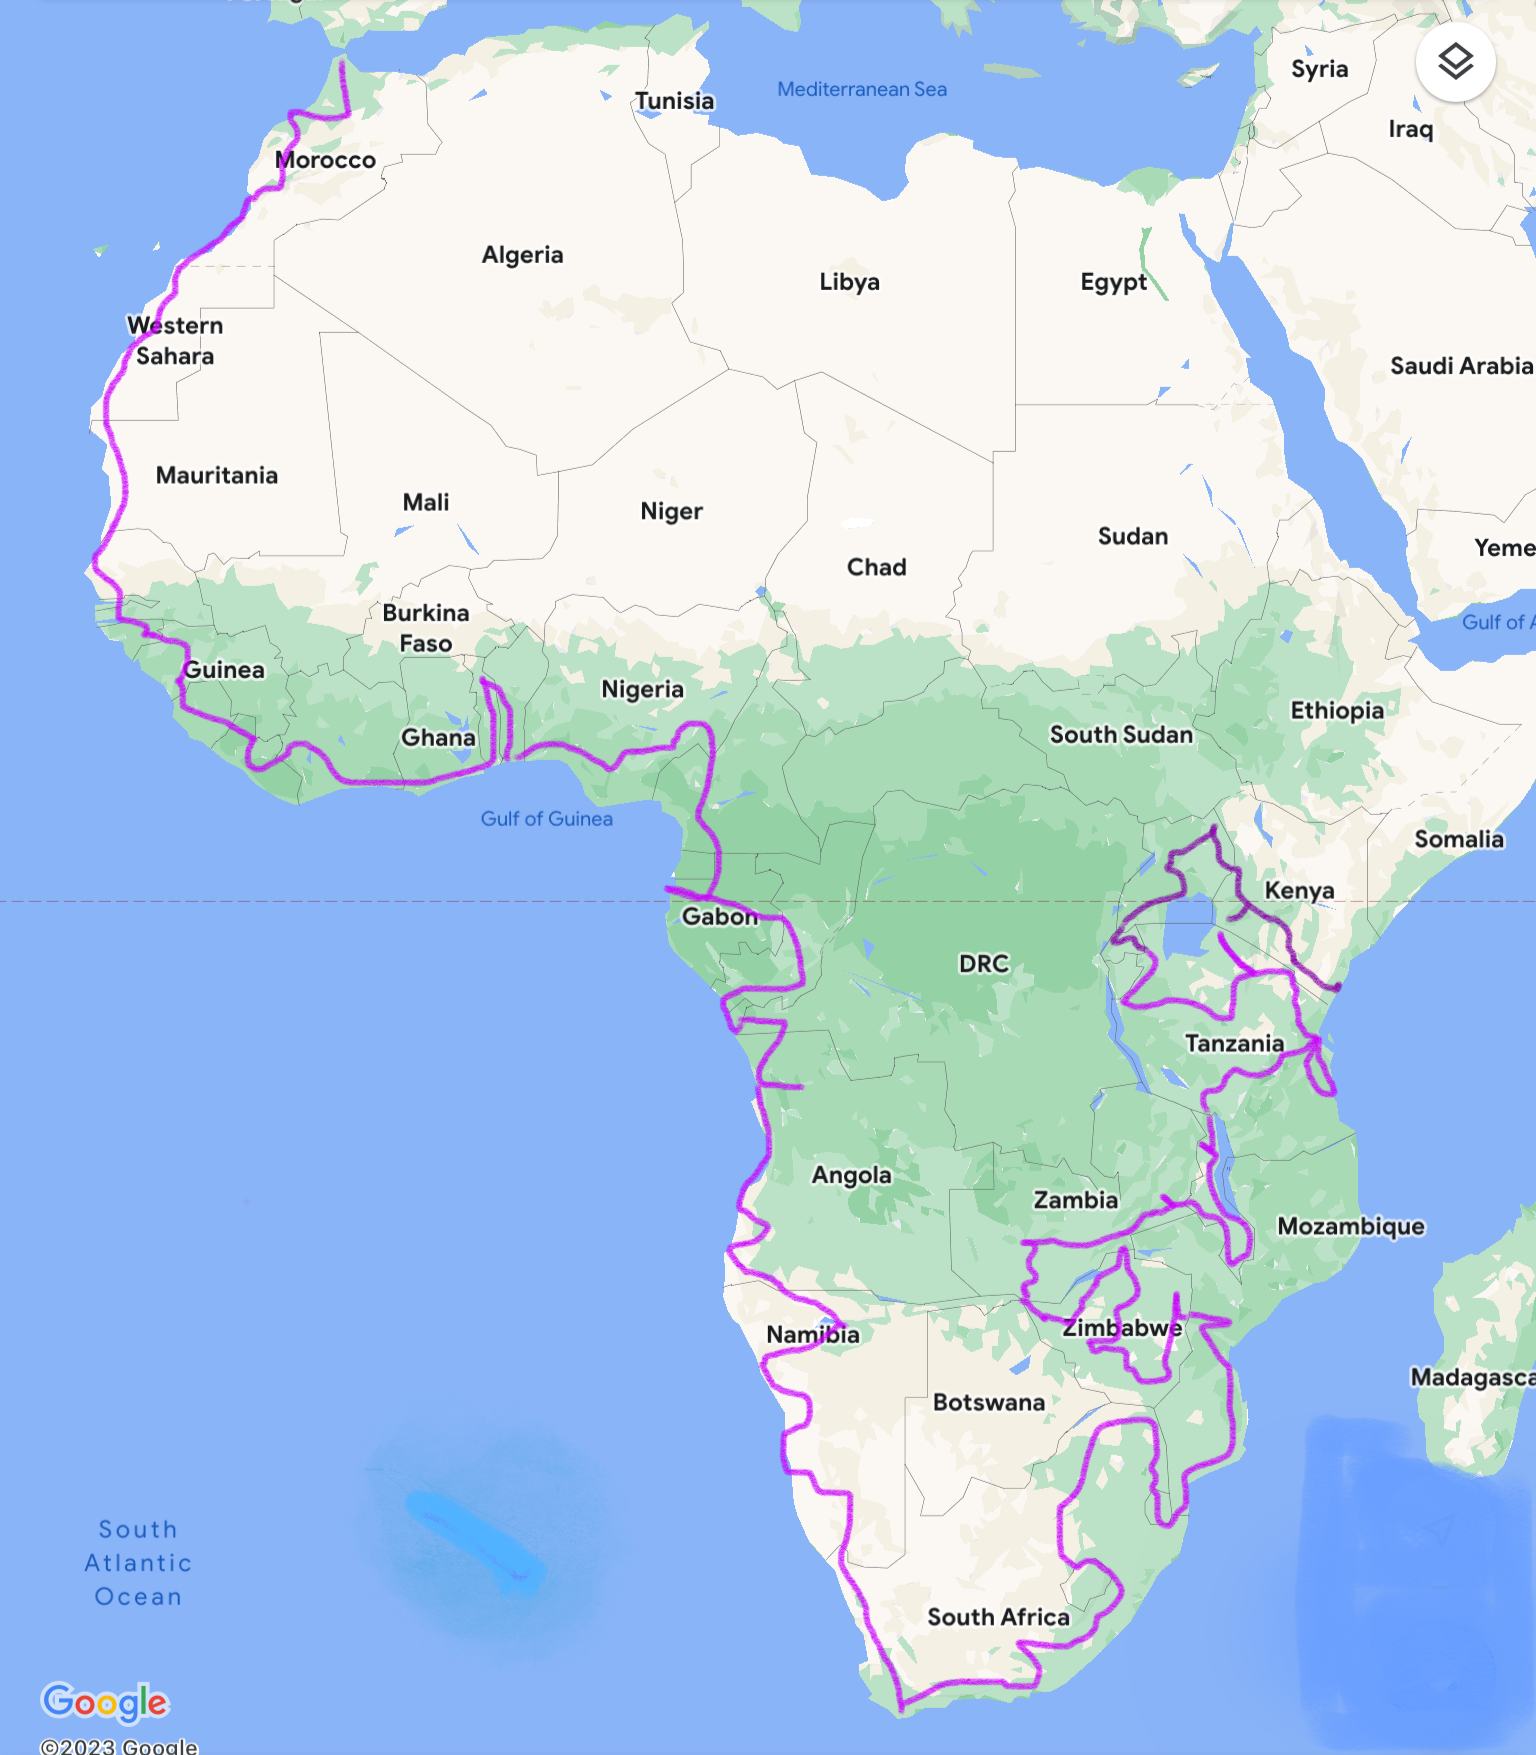 Africa+route.png